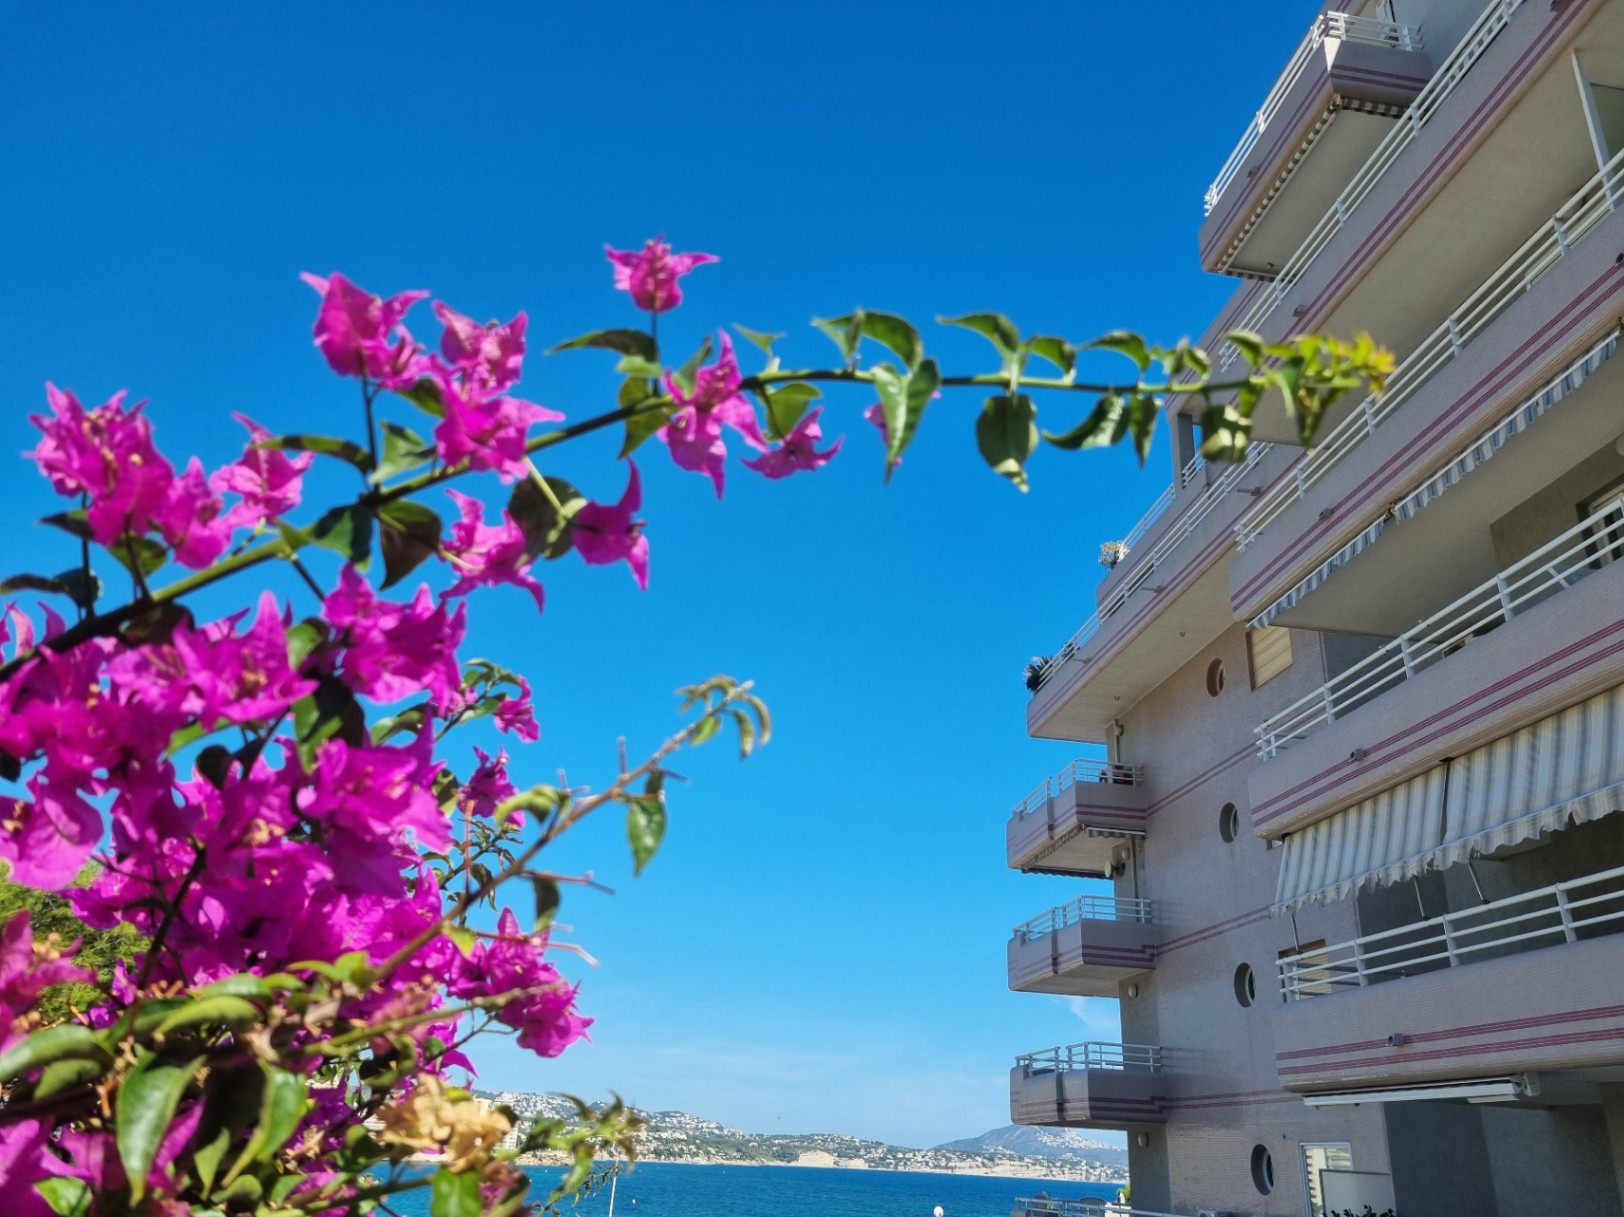 APARTMENT LOCATED 50 METERS FROM THE BEACH WITH A LARGE TERRACE